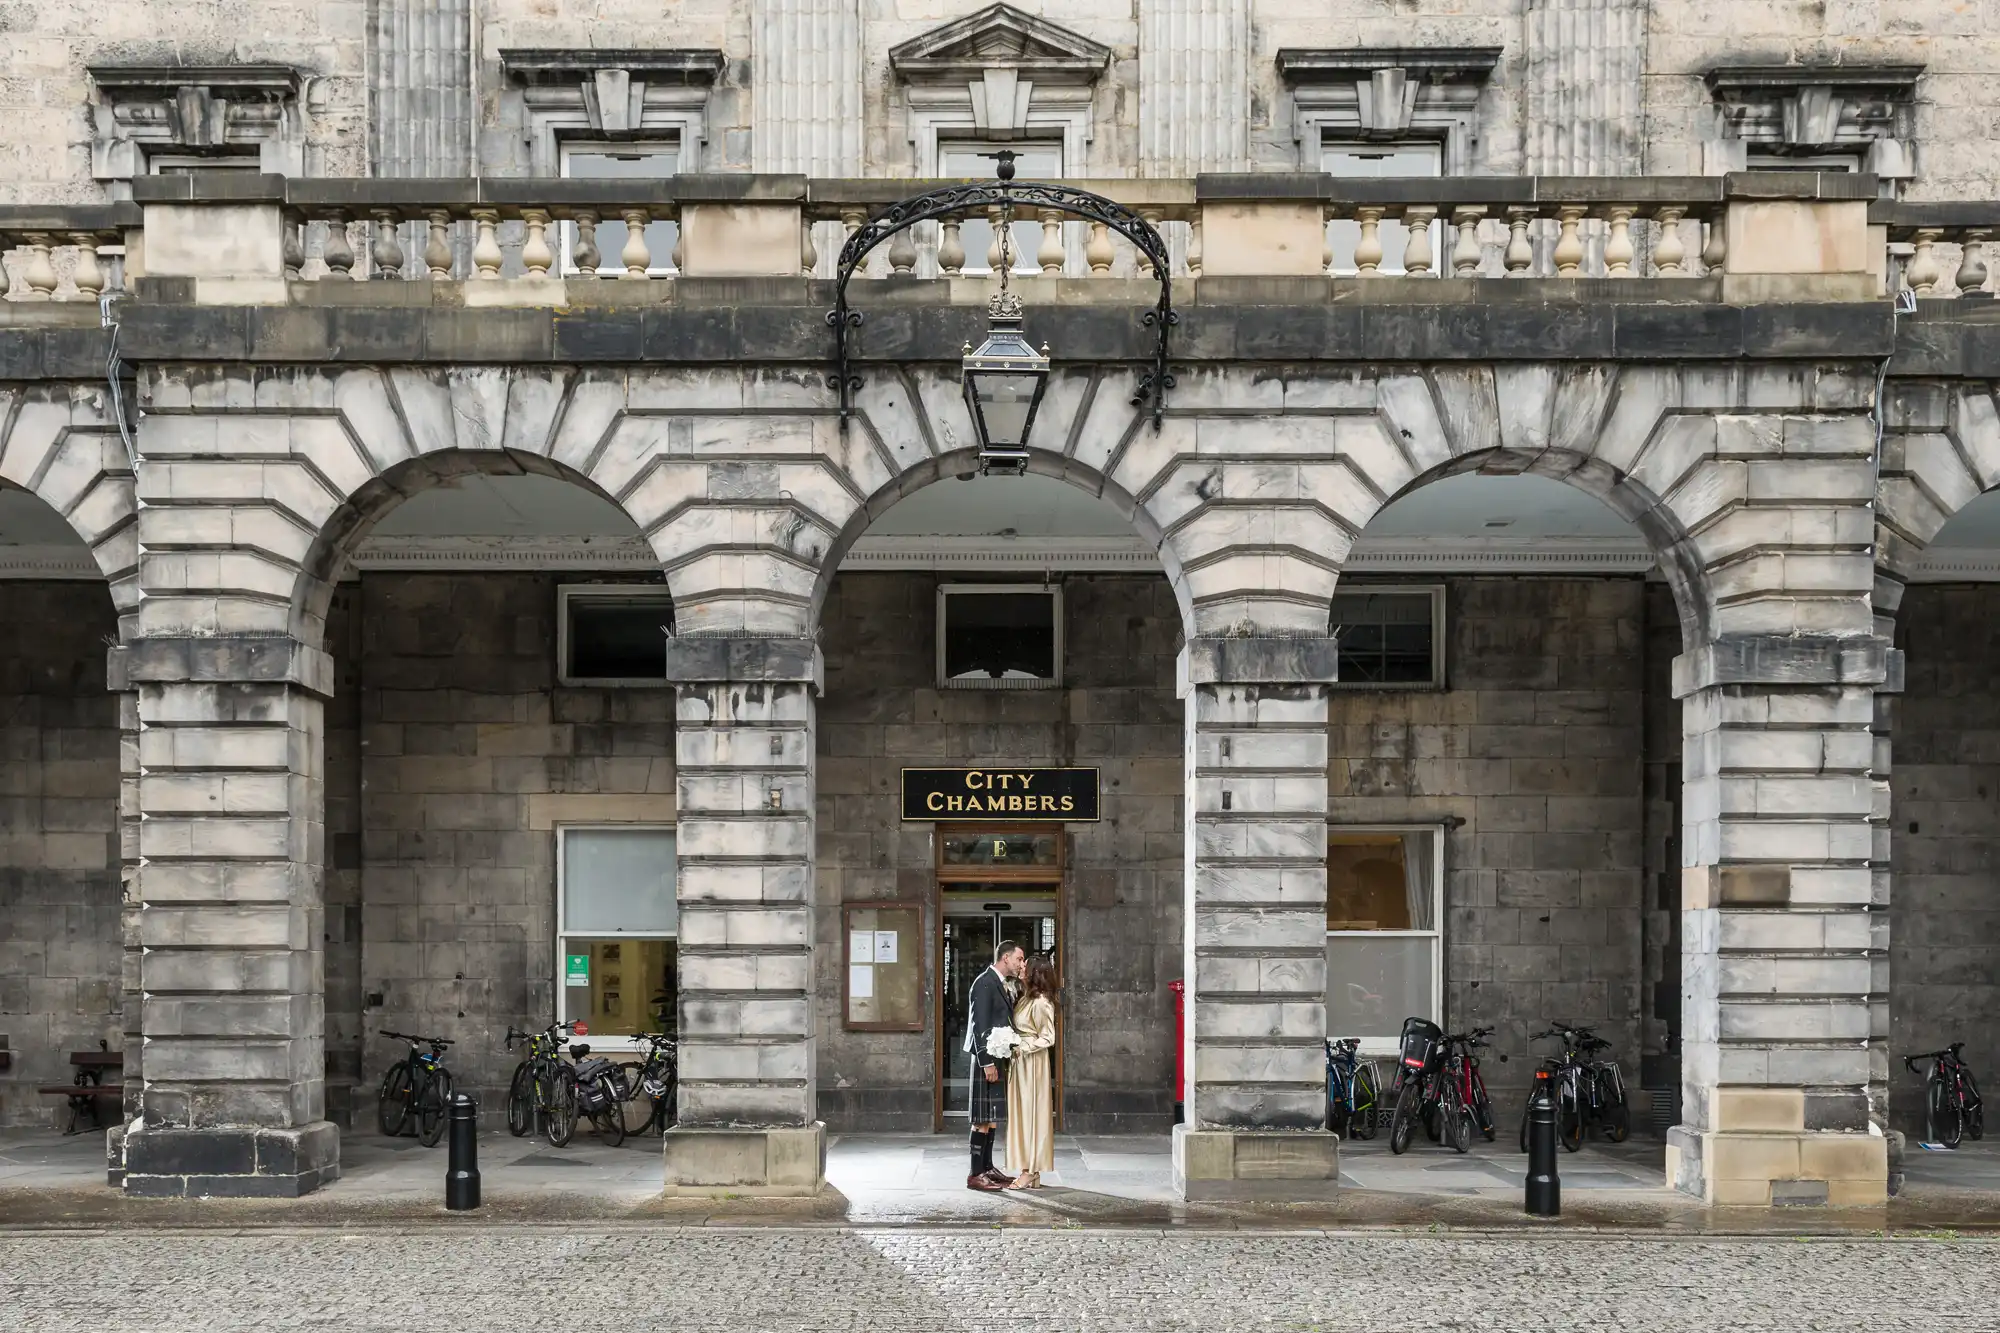 Newlyweds outside a building labelled "City Chambers," with several bicycles parked nearby and an arched stone façade in the background.